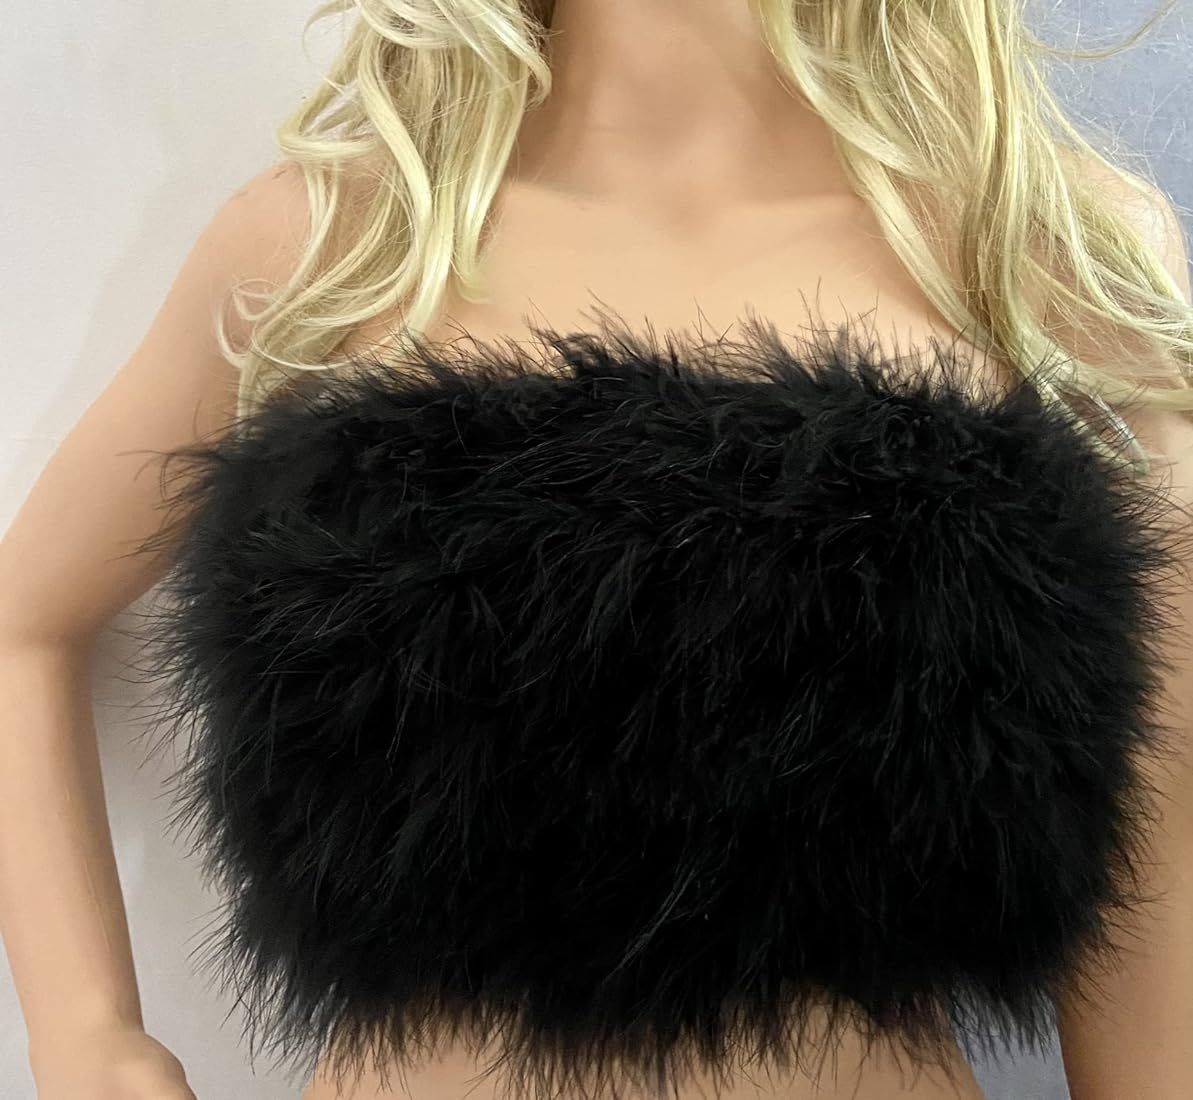 ZGMYC Women's Sexy Feather Crop Top Furry Faux Fur Strapless Tube Top Bandeau Sleeveless Camisole... | Amazon (US)